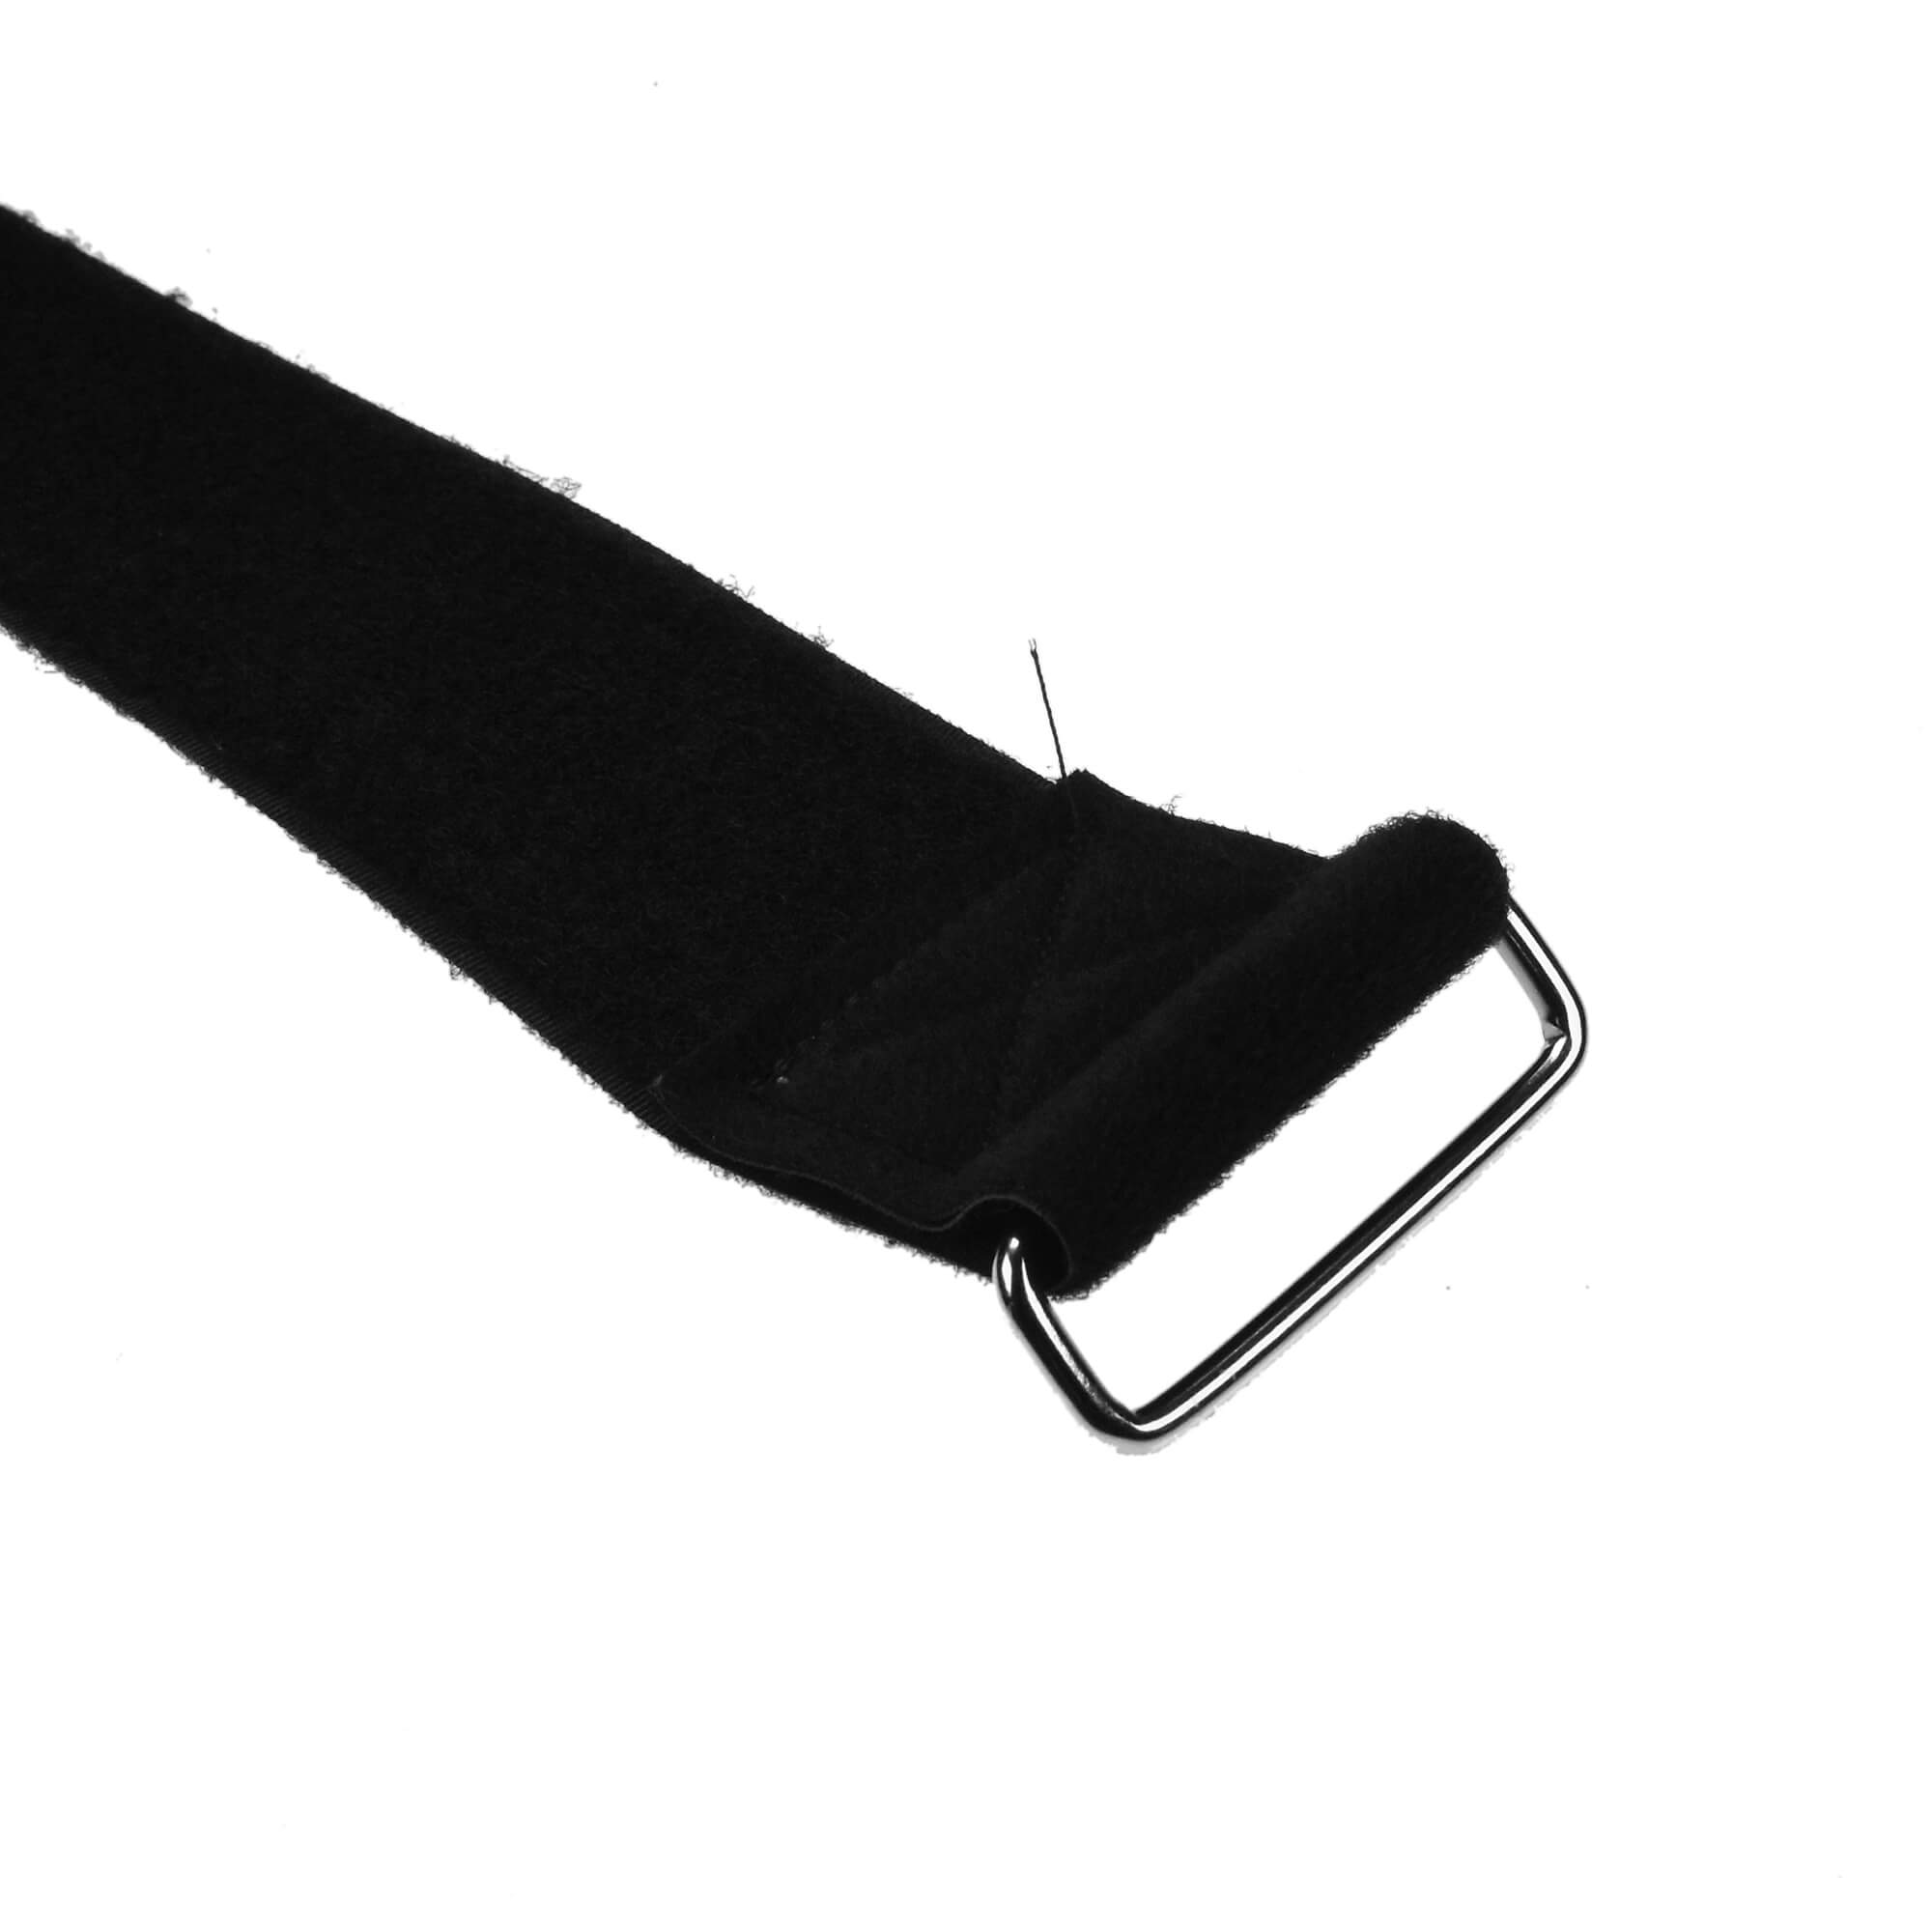 50mm Steel Buckle Strap with VELCRO® Brand Soft Velour Backed Loop